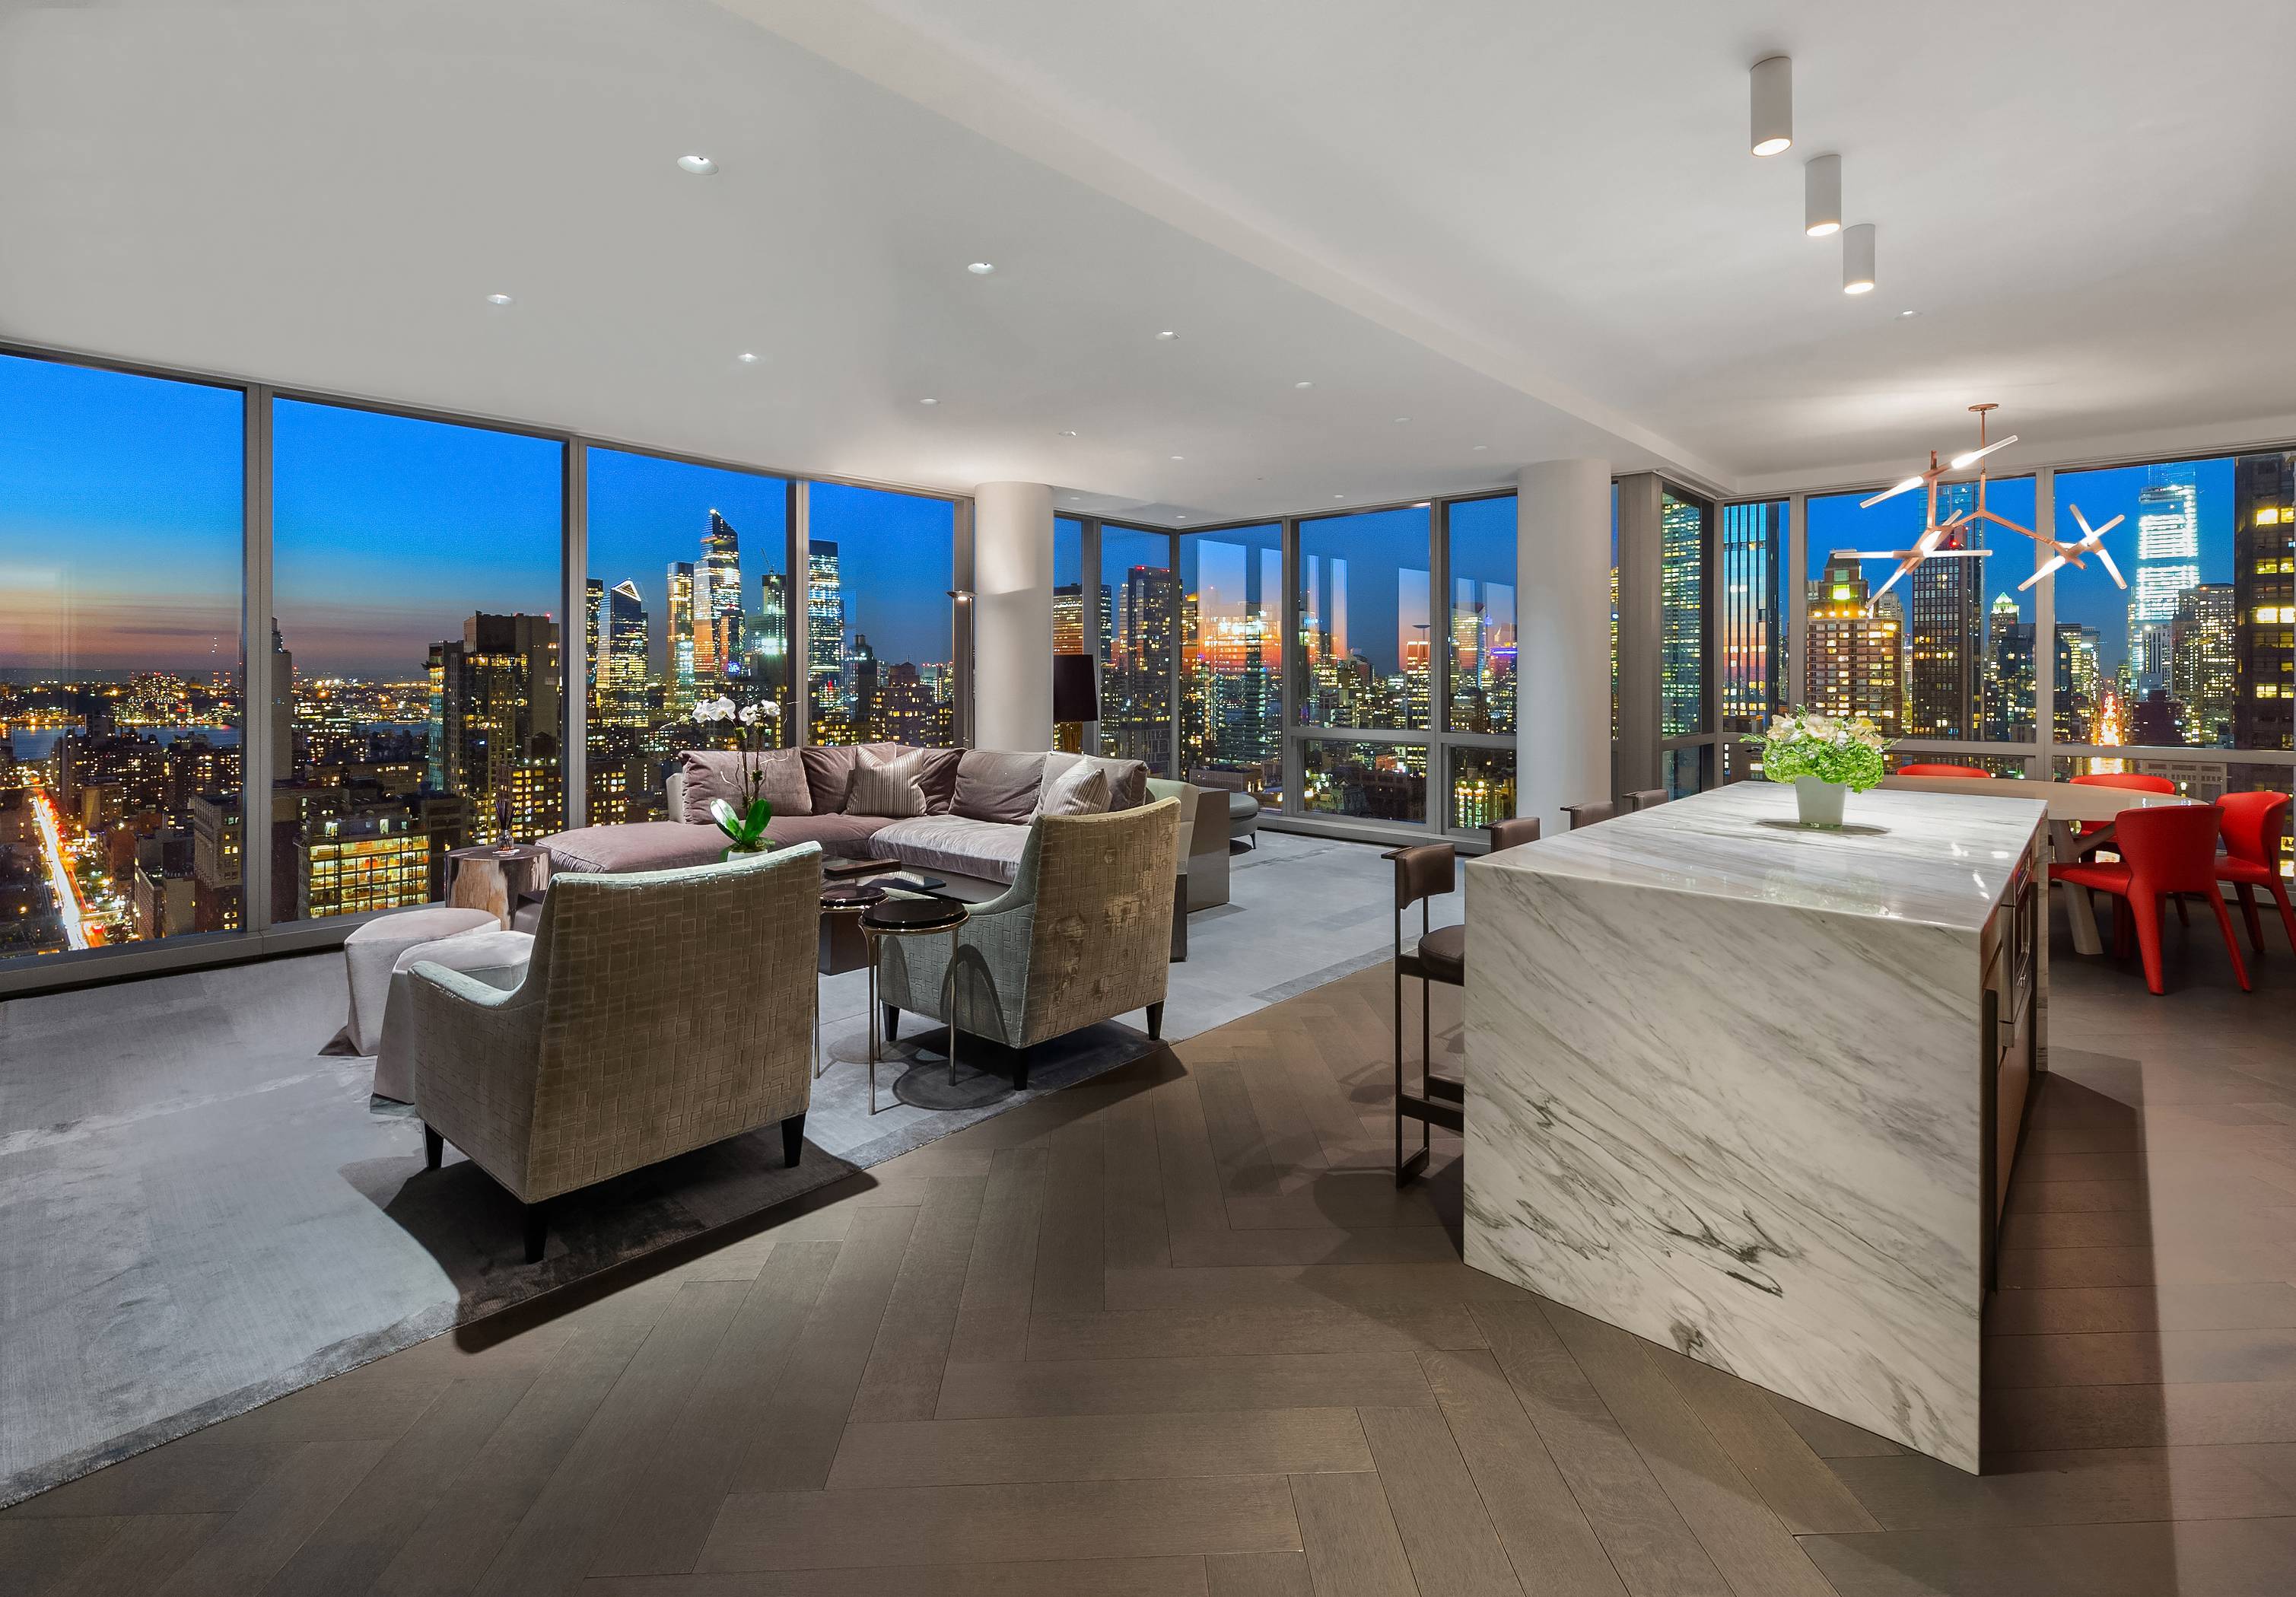 With unparalleled, 360o city views, this spectacular 3, 310 sq.